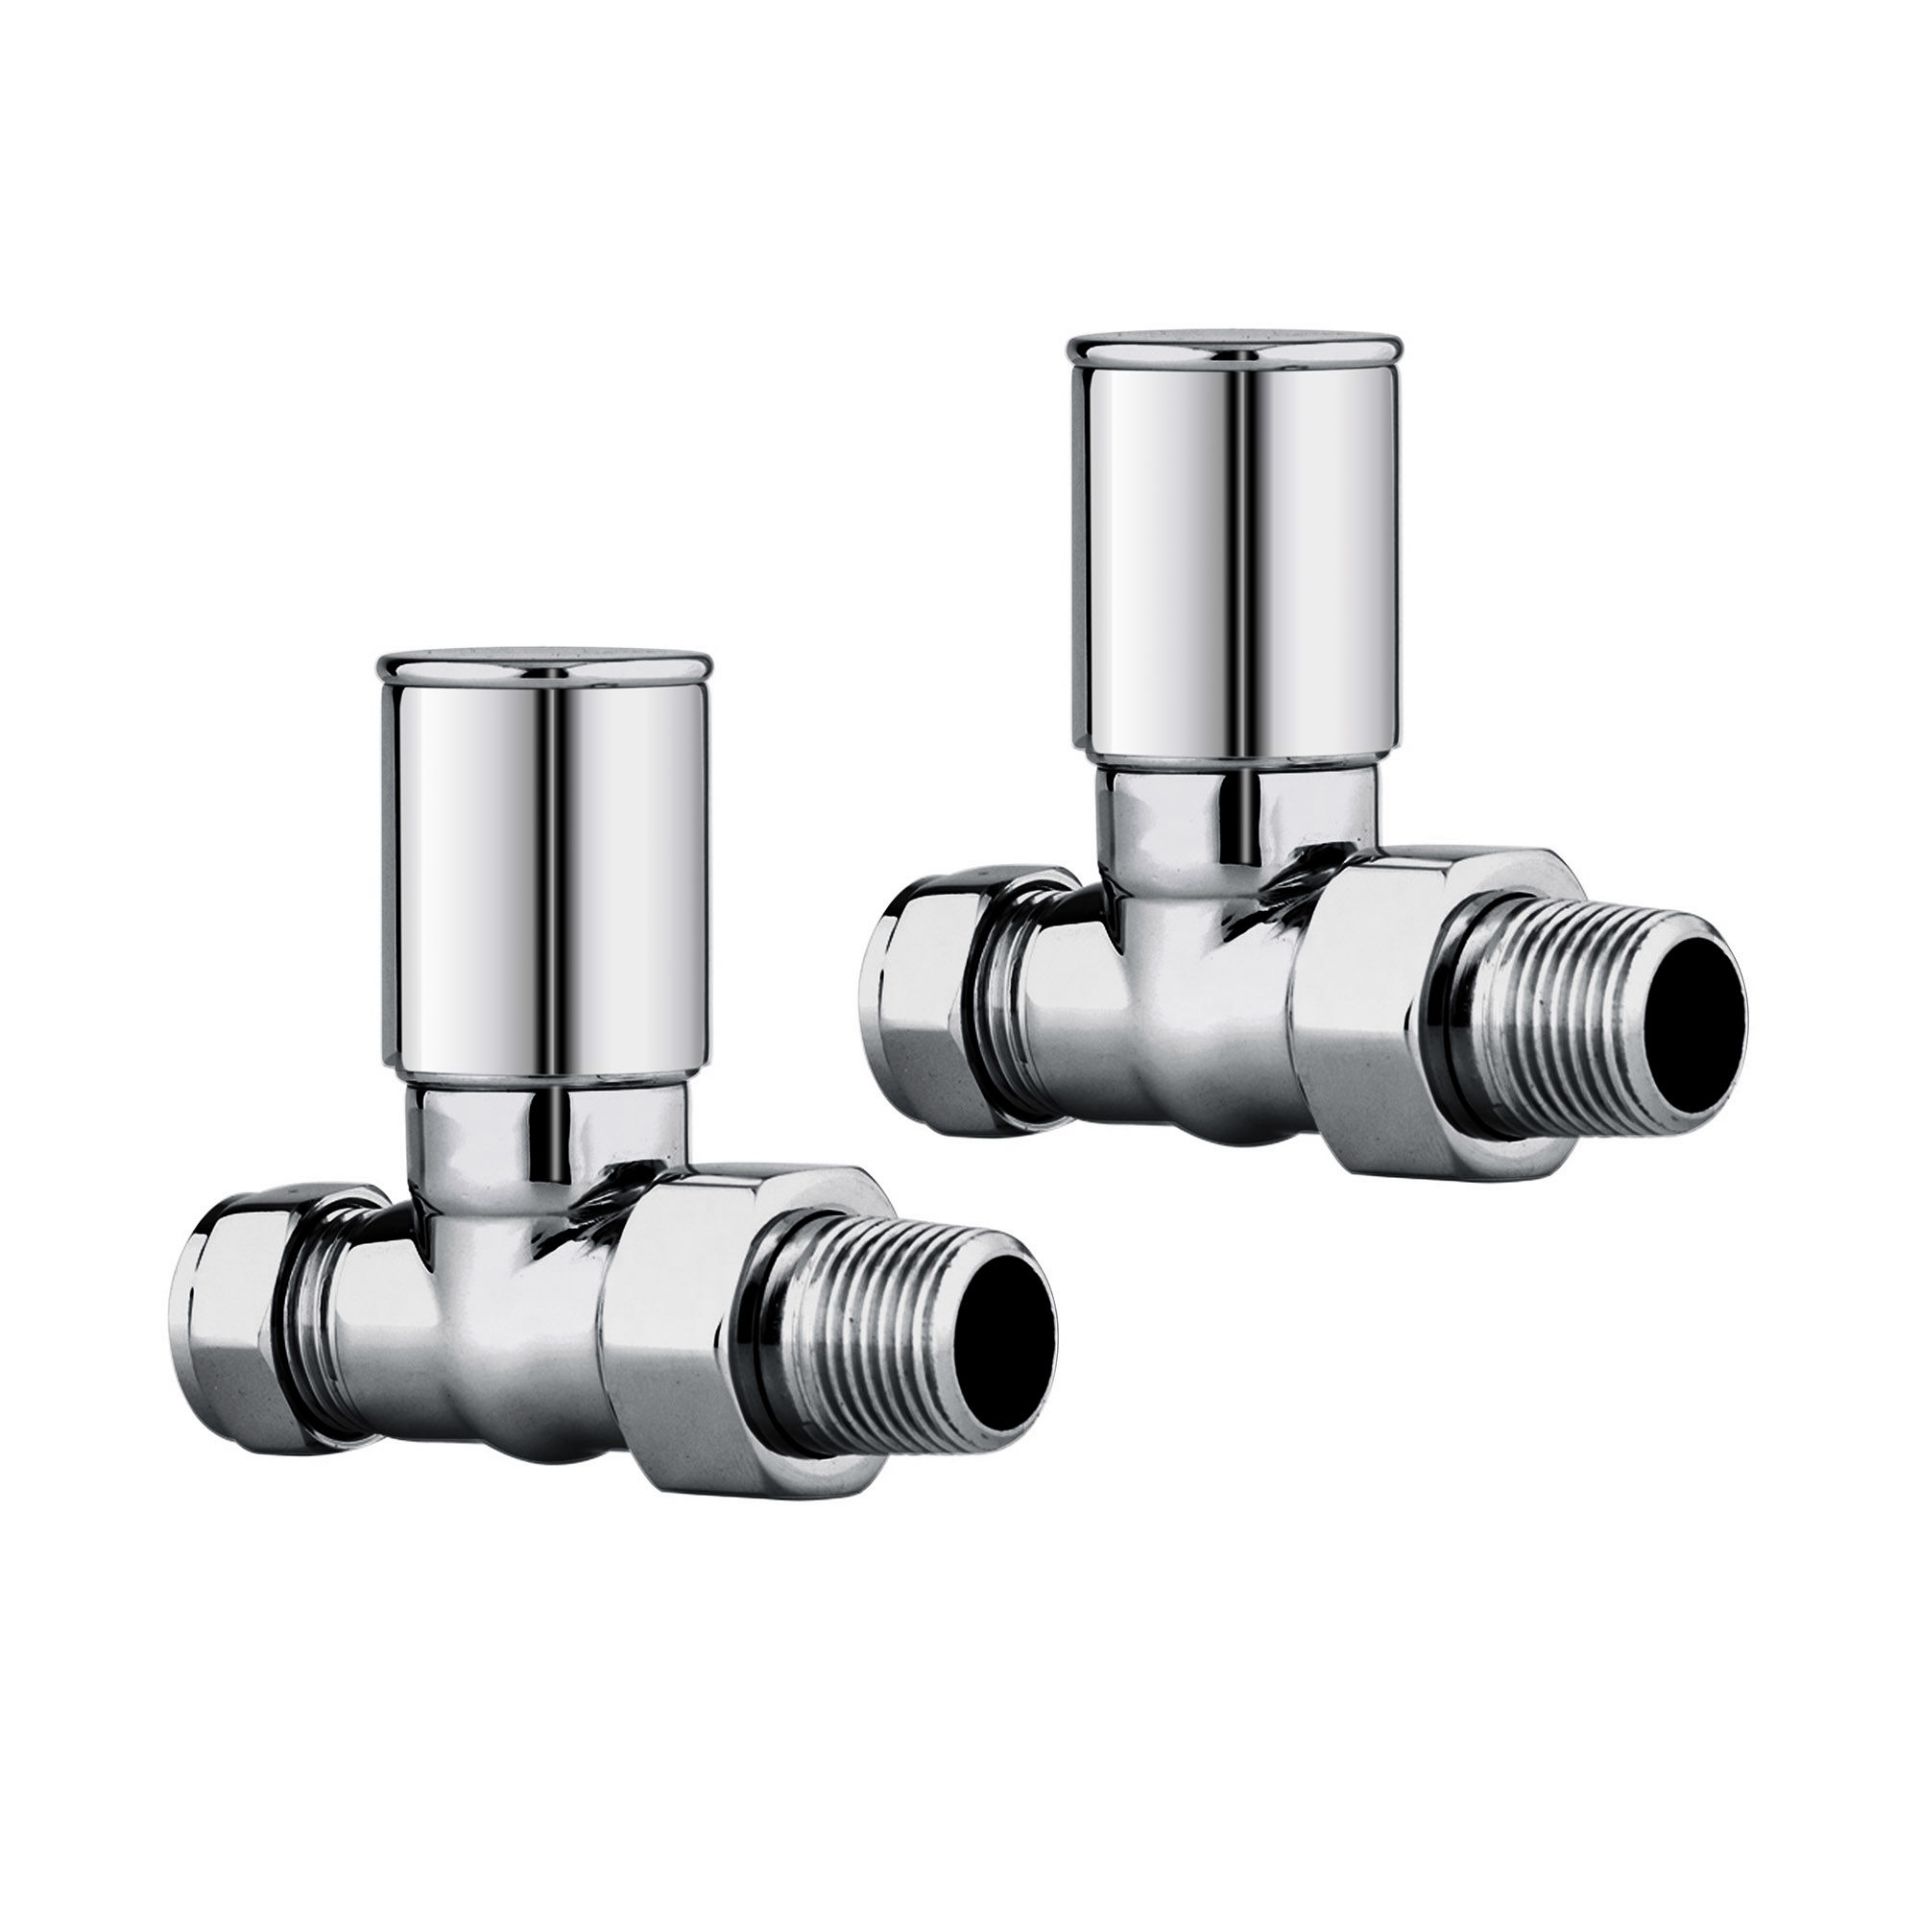 (MP77) 15mm Standard Connection Straight Radiator Valves - Heavy Duty Polished Chrome Plated Brass